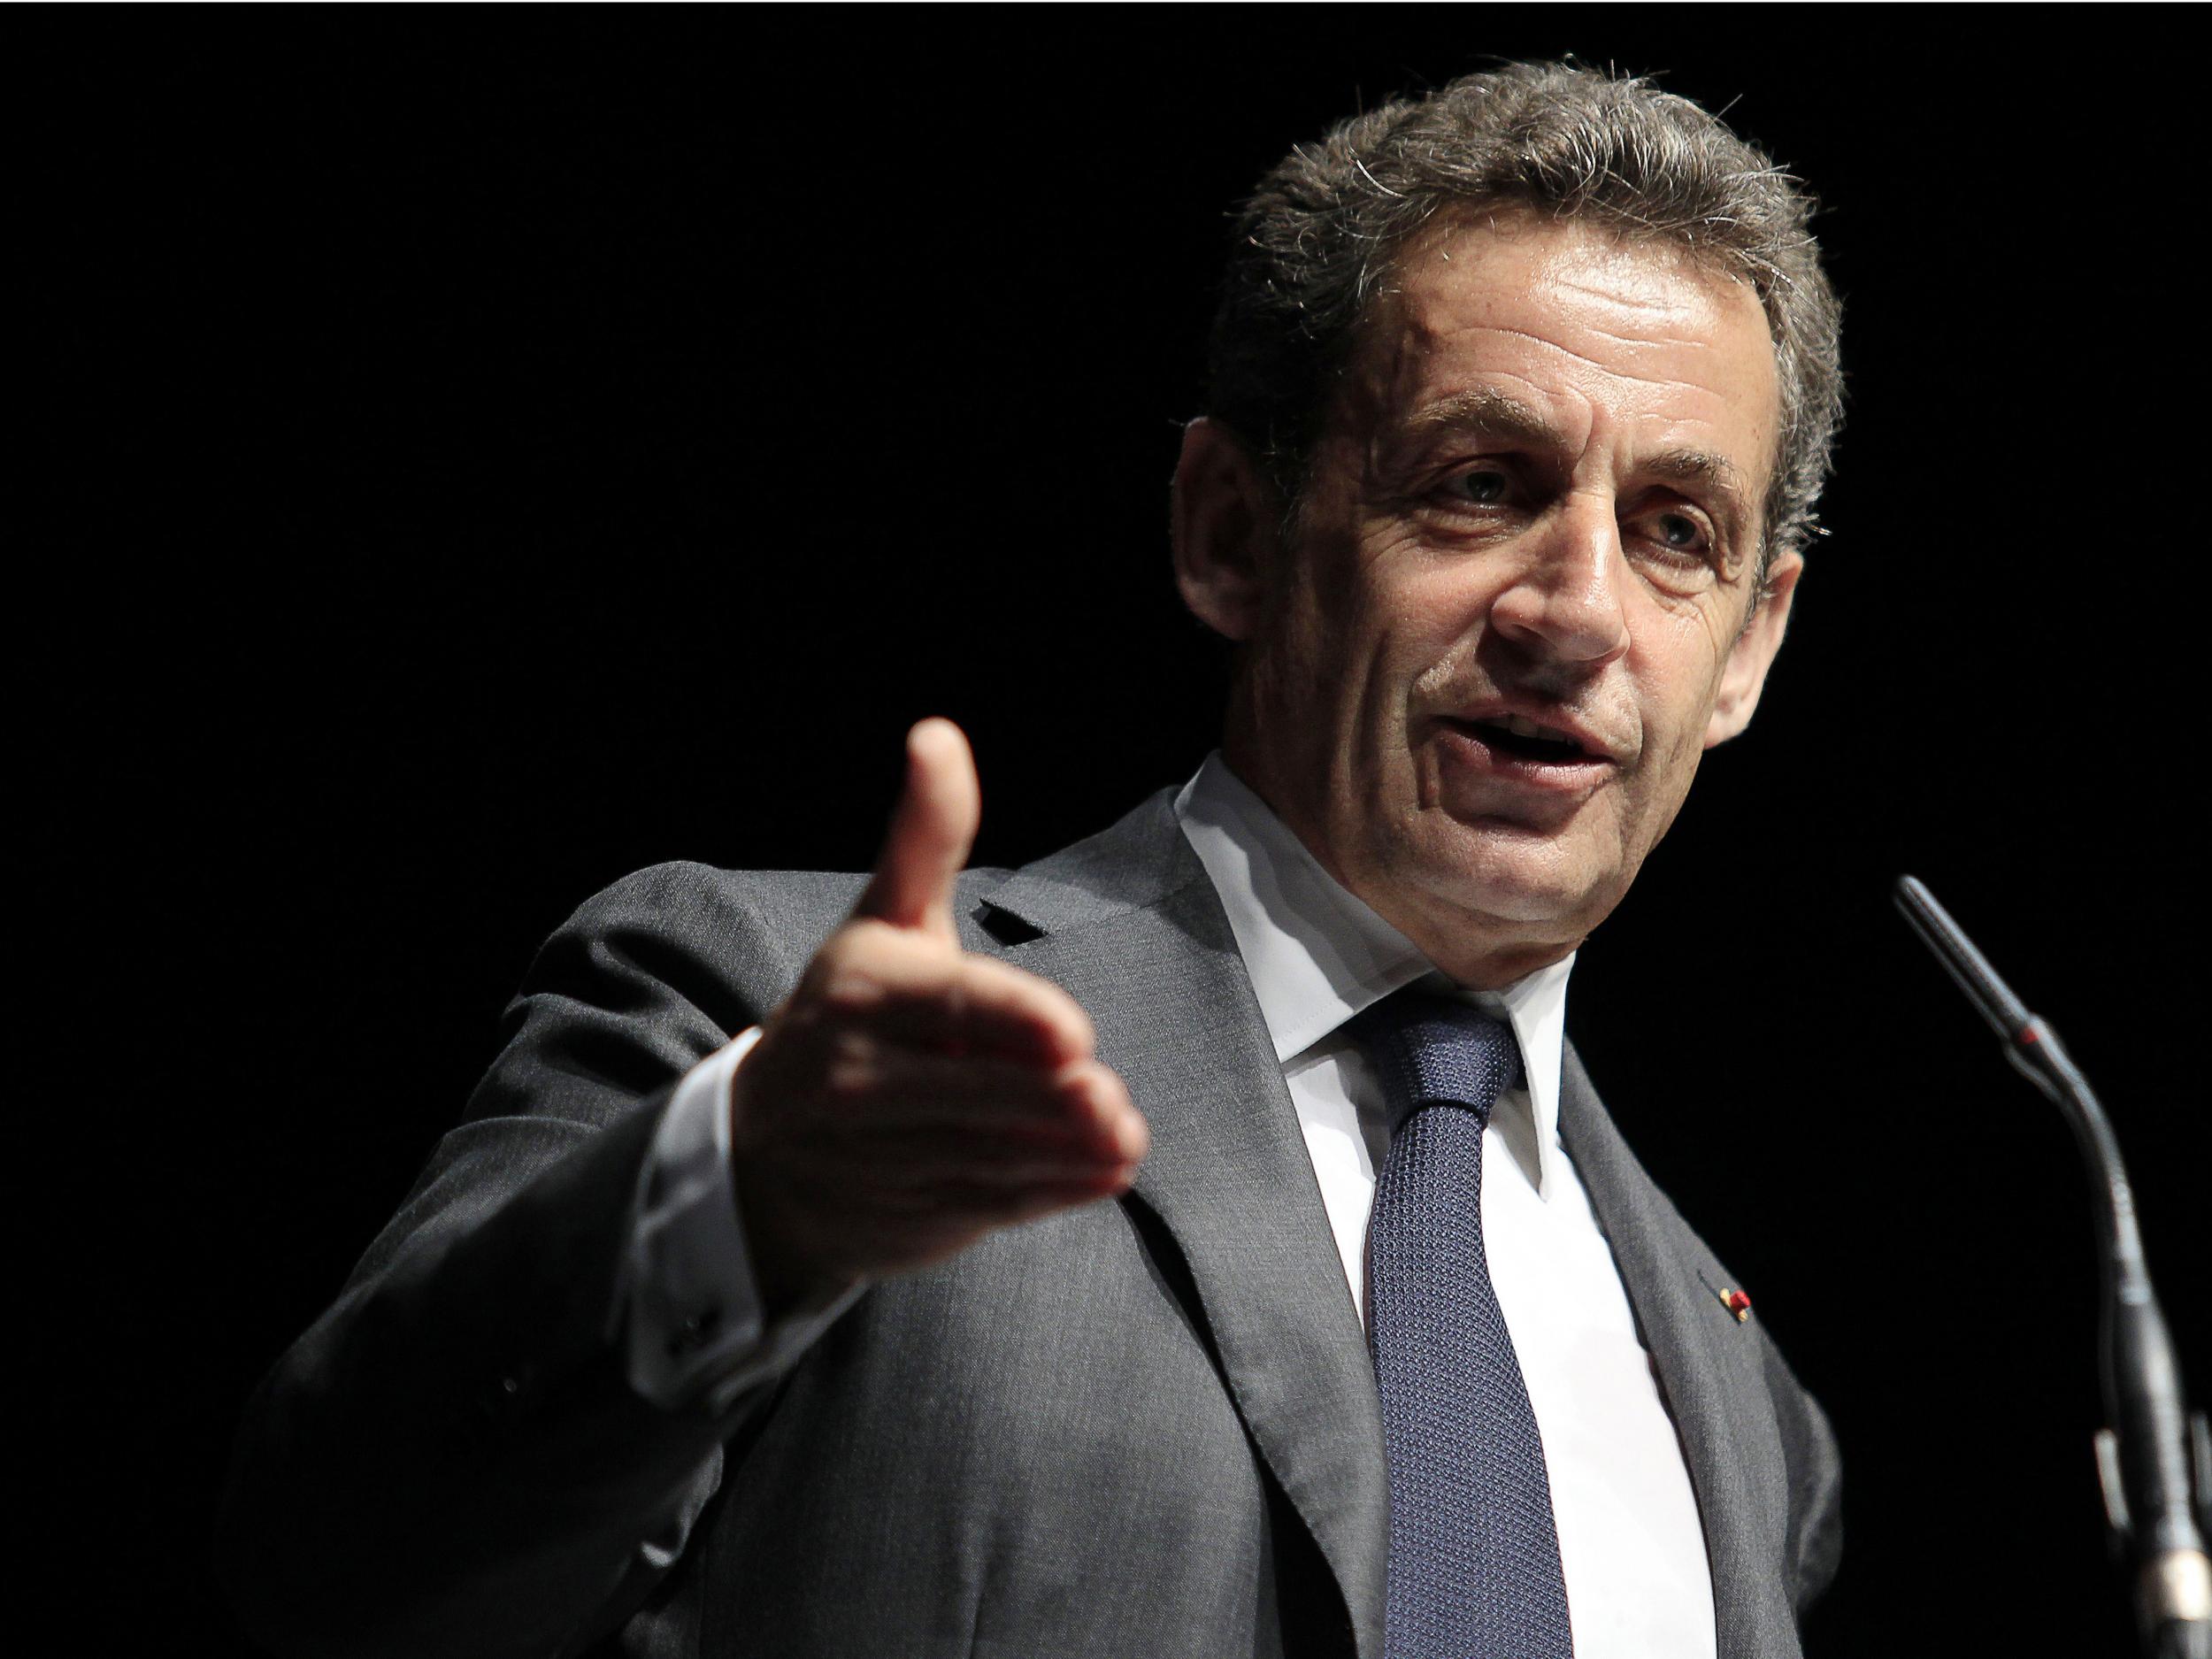 Nicolas Sarkozy is among the former presidents receiving thousands of euros in taxpayers' money after leaving office